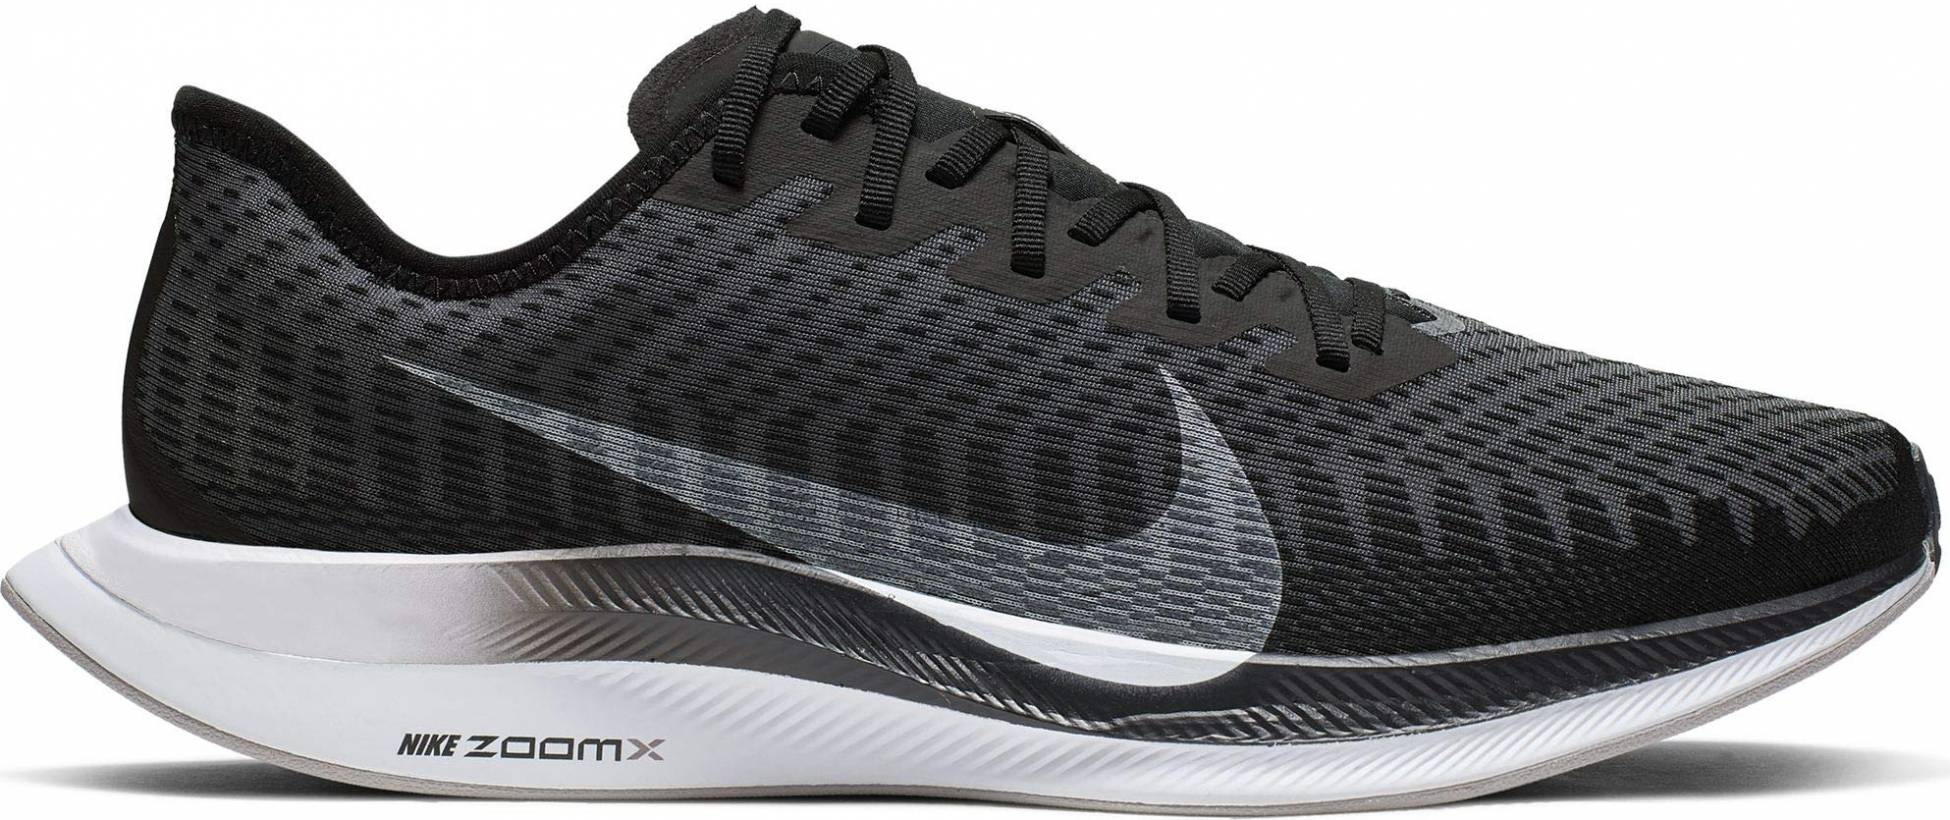 Save 34% on Black Nike Running Shoes 